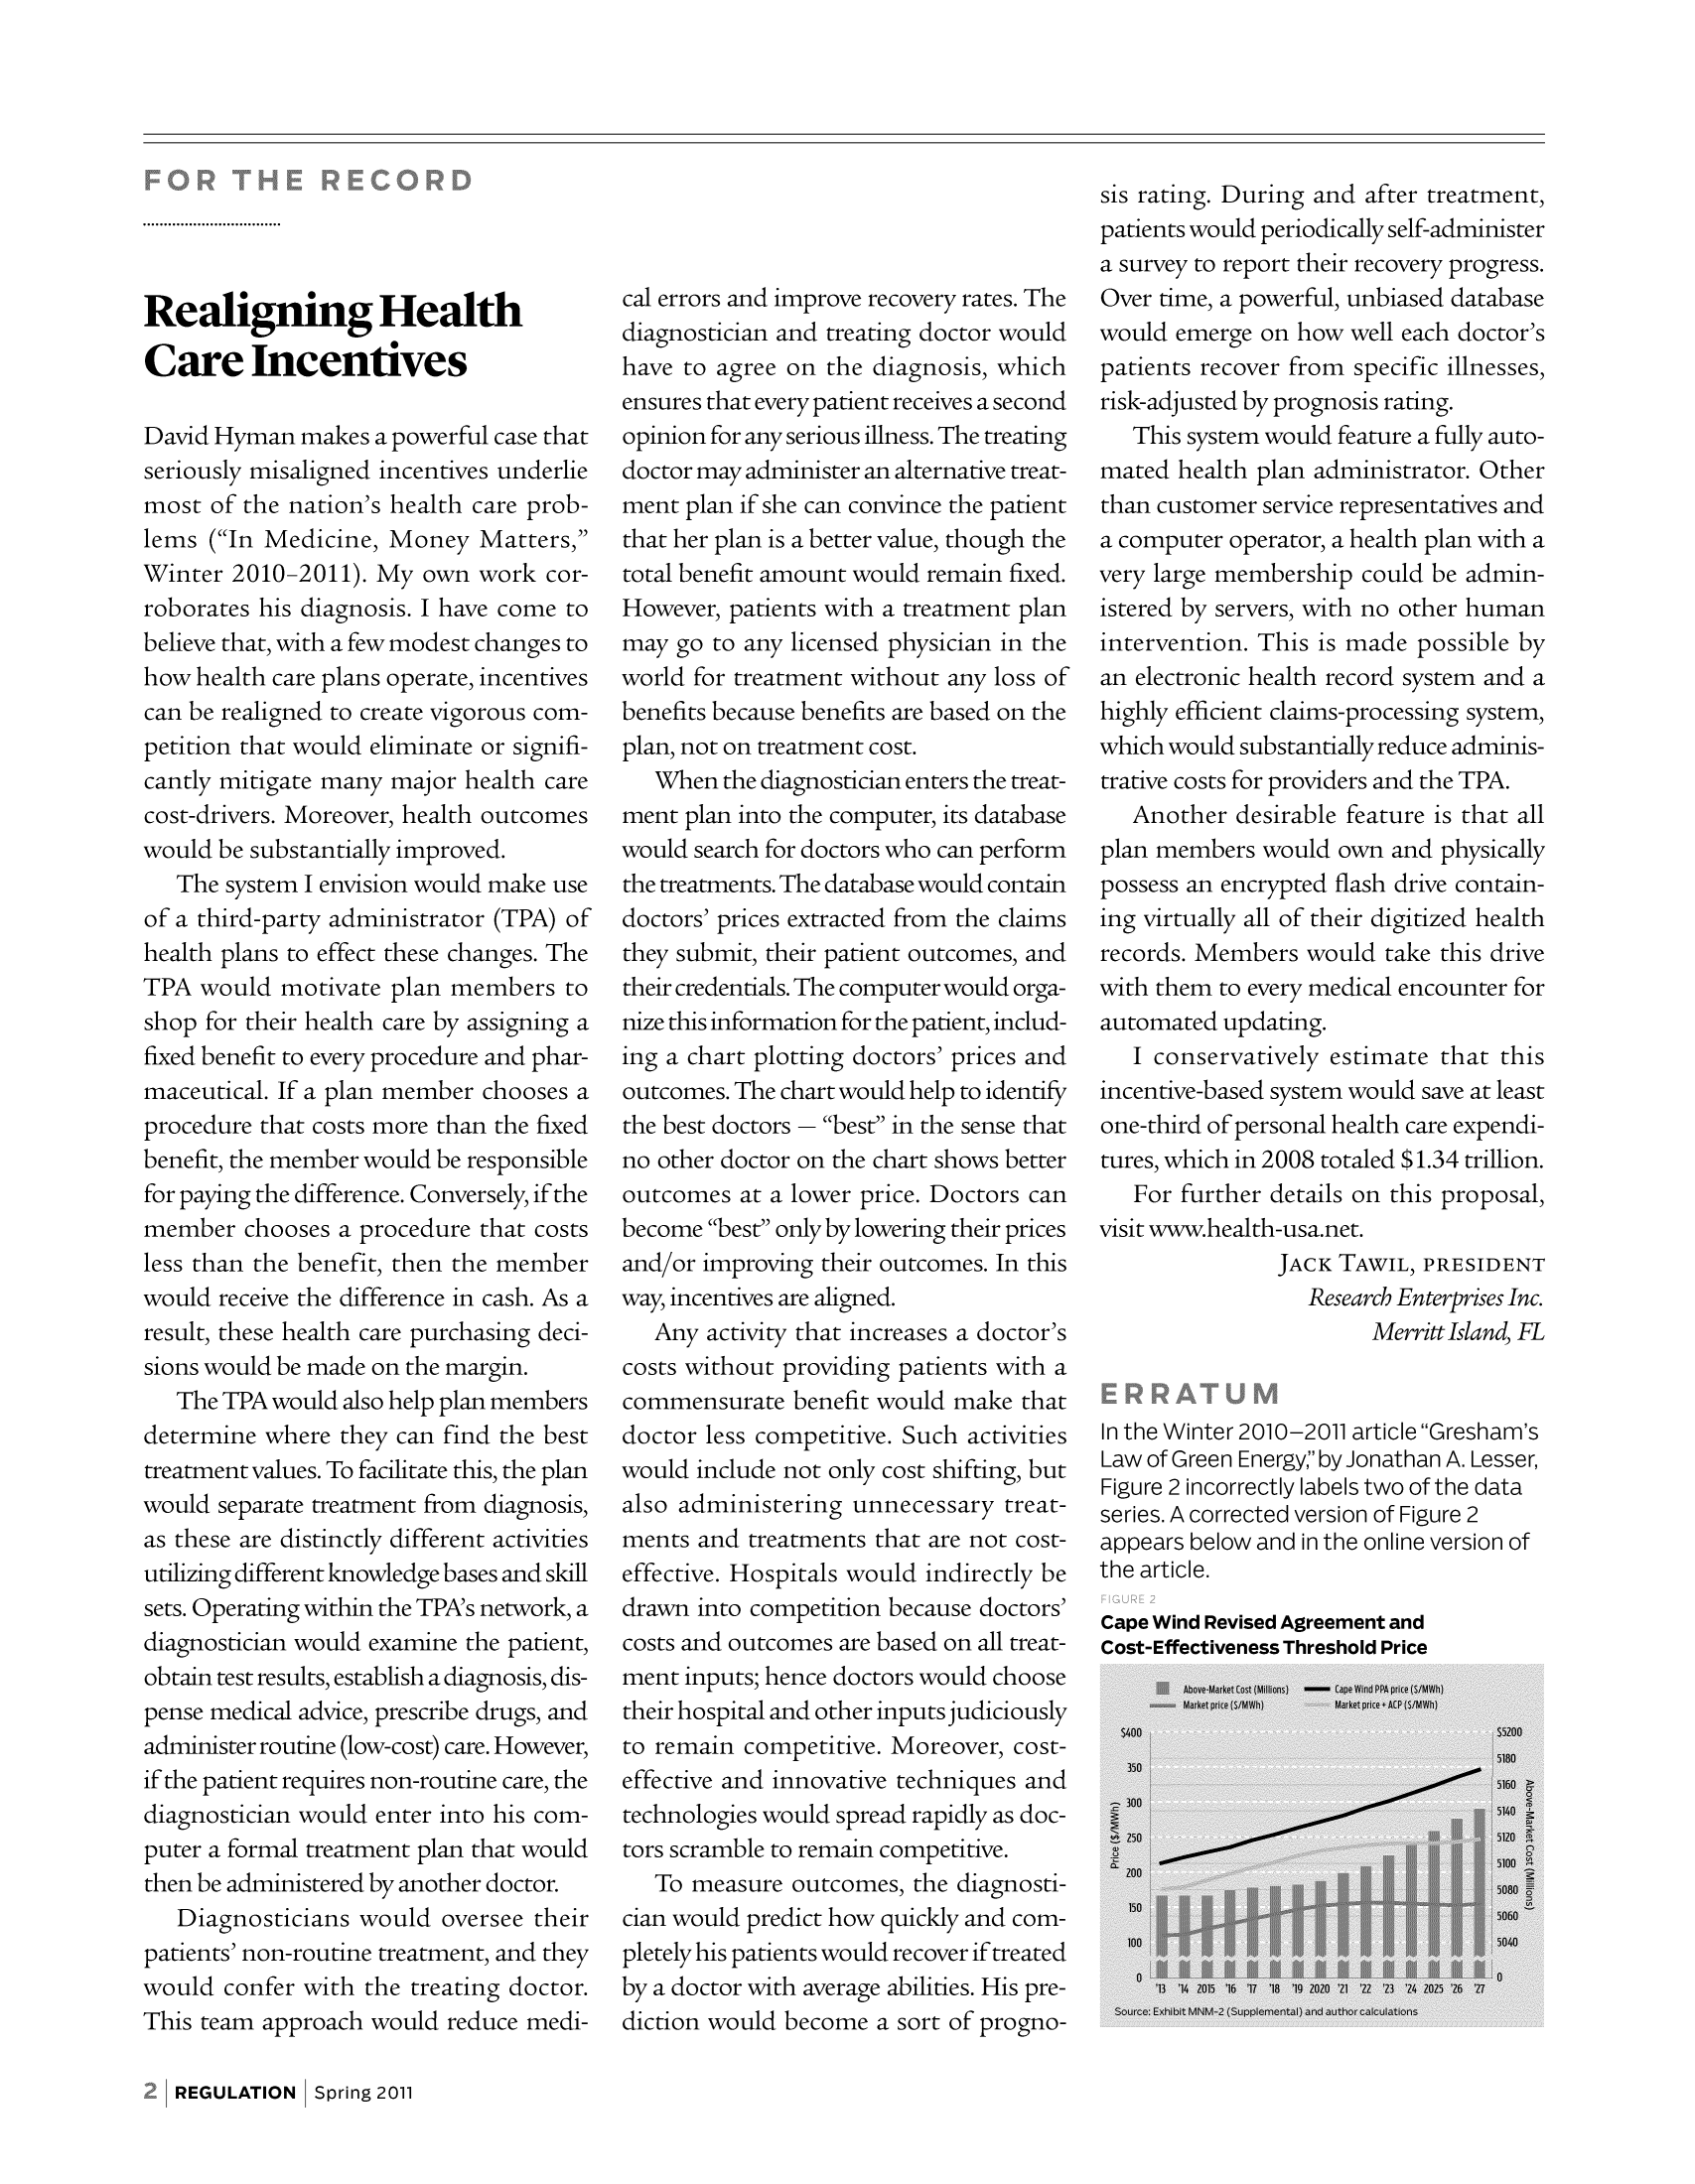 handle is hein.journals/rcatorbg34 and id is 1 raw text is: Realigning Health
Care Incentives
David Hyman makes a powerful case that
seriously misaligned incentives underlie
most of the nation's health care prob-
lems (In Medicine, Money Matters,
Winter 2010-2011). My own work cor-
roborates his diagnosis. I have come to
believe that, with a few modest changes to
how health care plans operate, incentives
can be realigned to create vigorous com-
petition that would eliminate or signifi-
cantly mitigate many major health care
cost-drivers. Moreover, health outcomes
would be substantially improved.
The system I envision would make use
of a third-party administrator (TPA) of
health plans to effect these changes. The
TPA would motivate plan members to
shop for their health care by assigning a
fixed benefit to every procedure and phar-
maceutical. If a plan member chooses a
procedure that costs more than the fixed
benefit, the member would be responsible
for paying the difference. Conversely, if the
member chooses a procedure that costs
less than the benefit, then the member
would receive the difference in cash. As a
result, these health care purchasing deci-
sions would be made on the margin.
The TPA would also help plan members
determine where they can find the best
treatment values. To facilitate this, the plan
would separate treatment from diagnosis,
as these are distinctly different activities
utilizing different knowledge bases and skill
sets. Operating within the TPA's network, a
diagnostician would examine the patient,
obtain test results, establish a diagnosis, dis-
pense medical advice, prescribe drugs, and
administer routine (low-cost) care. However,
if the patient requires non-routine care, the
diagnostician would enter into his com-
puter a formal treatment plan that would
then be administered by another doctor.
Diagnosticians would oversee their
patients' non-routine treatment, and they
would confer with the treating doctor.
This team approach would reduce medi-

cal errors and improve recovery rates. The
diagnostician and treating doctor would
have to agree on the diagnosis, which
ensures that every patient receives a second
opinion for any serious illness. The treating
doctor may administer an alternative treat-
ment plan if she can convince the patient
that her plan is a better value, though the
total benefit amount would remain fixed.
However, patients with a treatment plan
may go to any licensed physician in the
world for treatment without any loss of
benefits because benefits are based on the
plan, not on treatment cost.
When the diagnostician enters the treat-
ment plan into the computer, its database
would search for doctors who can perform
the treatments. The database would contain
doctors' prices extracted from the claims
they submit, their patient outcomes, and
their credentials. The computer would orga-
nize this information for the patient, includ-
ing a chart plotting doctors' prices and
outcomes. The chart would help to identify
the best doctors - best in the sense that
no other doctor on the chart shows better
outcomes at a lower price. Doctors can
become best only by lowering their prices
and/or improving their outcomes. In this
way, incentives are aligned.
Any activity that increases a doctor's
costs without providing patients with a
commensurate benefit would make that
doctor less competitive. Such activities
would include not only cost shifting, but
also administering unnecessary treat-
ments and treatments that are not cost-
effective. Hospitals would indirectly be
drawn into competition because doctors'
costs and outcomes are based on all treat-
ment inputs; hence doctors would choose
their hospital and other inputs judiciously
to remain competitive. Moreover, cost-
effective and innovative techniques and
technologies would spread rapidly as doc-
tors scramble to remain competitive.
To measure outcomes, the diagnosti-
cian would predict how quickly and com-
pletely his patients would recover if treated
by a doctor with average abilities. His pre-
diction would become a sort of progno-

sis rating. During and after treatment,
patients would periodically self-administer
a survey to report their recovery progress.
Over time, a powerful, unbiased database
would emerge on how well each doctor's
patients recover from specific illnesses,
risk-adjusted by prognosis rating.
This system would feature a fully auto-
mated health plan administrator. Other
than customer service representatives and
a computer operator, a health plan with a
very large membership could be admin-
istered by servers, with no other human
intervention. This is made possible by
an electronic health record system and a
highly efficient claims-processing system,
which would substantially reduce adminis-
trative costs for providers and the TPA.
Another desirable feature is that all
plan members would own and physically
possess an encrypted flash drive contain-
ing virtually all of their digitized health
records. Members would take this drive
with them to every medical encounter for
automated updating.
I conservatively estimate that this
incentive-based system would save at least
one-third of personal health care expendi-
tures, which in 2008 totaled $1.34 trillion.
For further details on this proposal,
visit www.health-usa.net.
JACK TAWIL, PRESIDENT
Research Enterprises Inc.
Merritt Island, FL
In the Winter 2010-2011 article Gresham's
Law of Green Energy,' byJonathan A. Lesser,
Figure 2 incorrectly labels two of the data
series. A corrected version of Figure 2
appears below and in the online version of
the article.

Cape Wind Revised Agreement and
Cnt-Effectivaness Threshnid Price

REGULATION | Spring 2011


